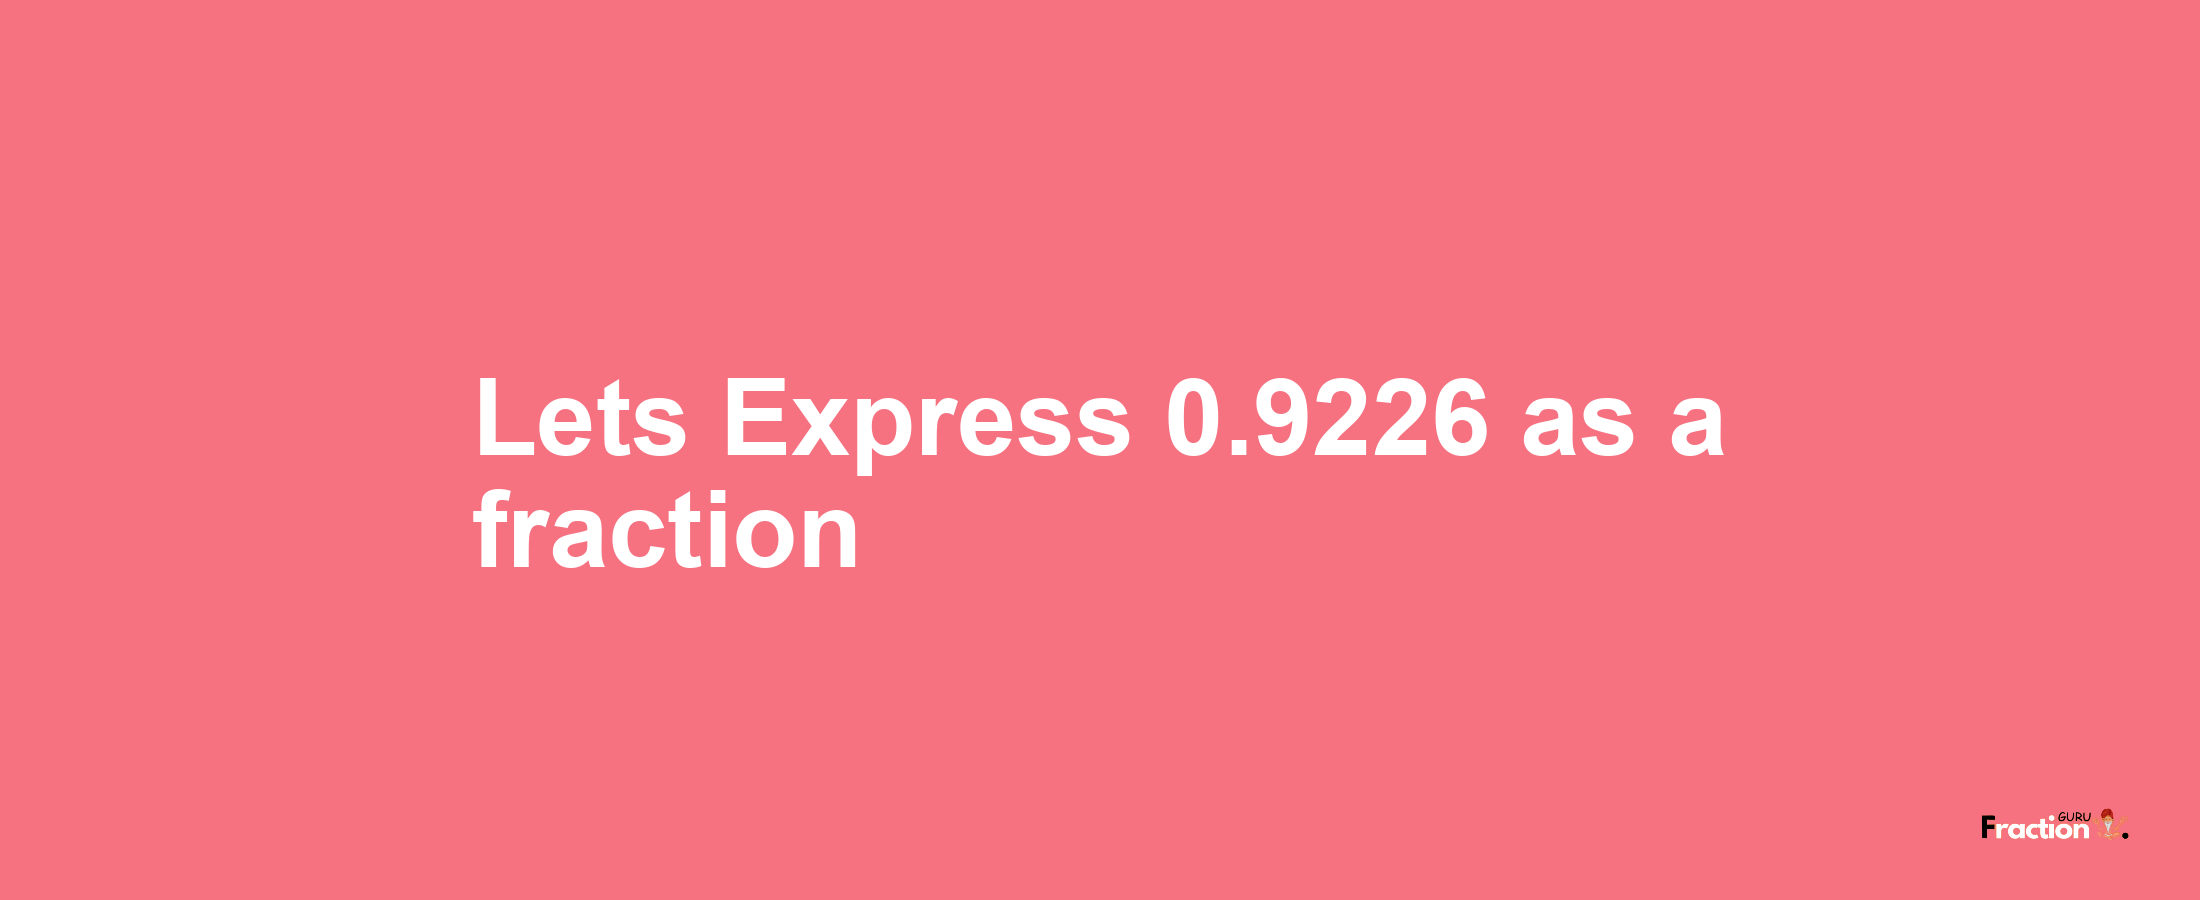 Lets Express 0.9226 as afraction